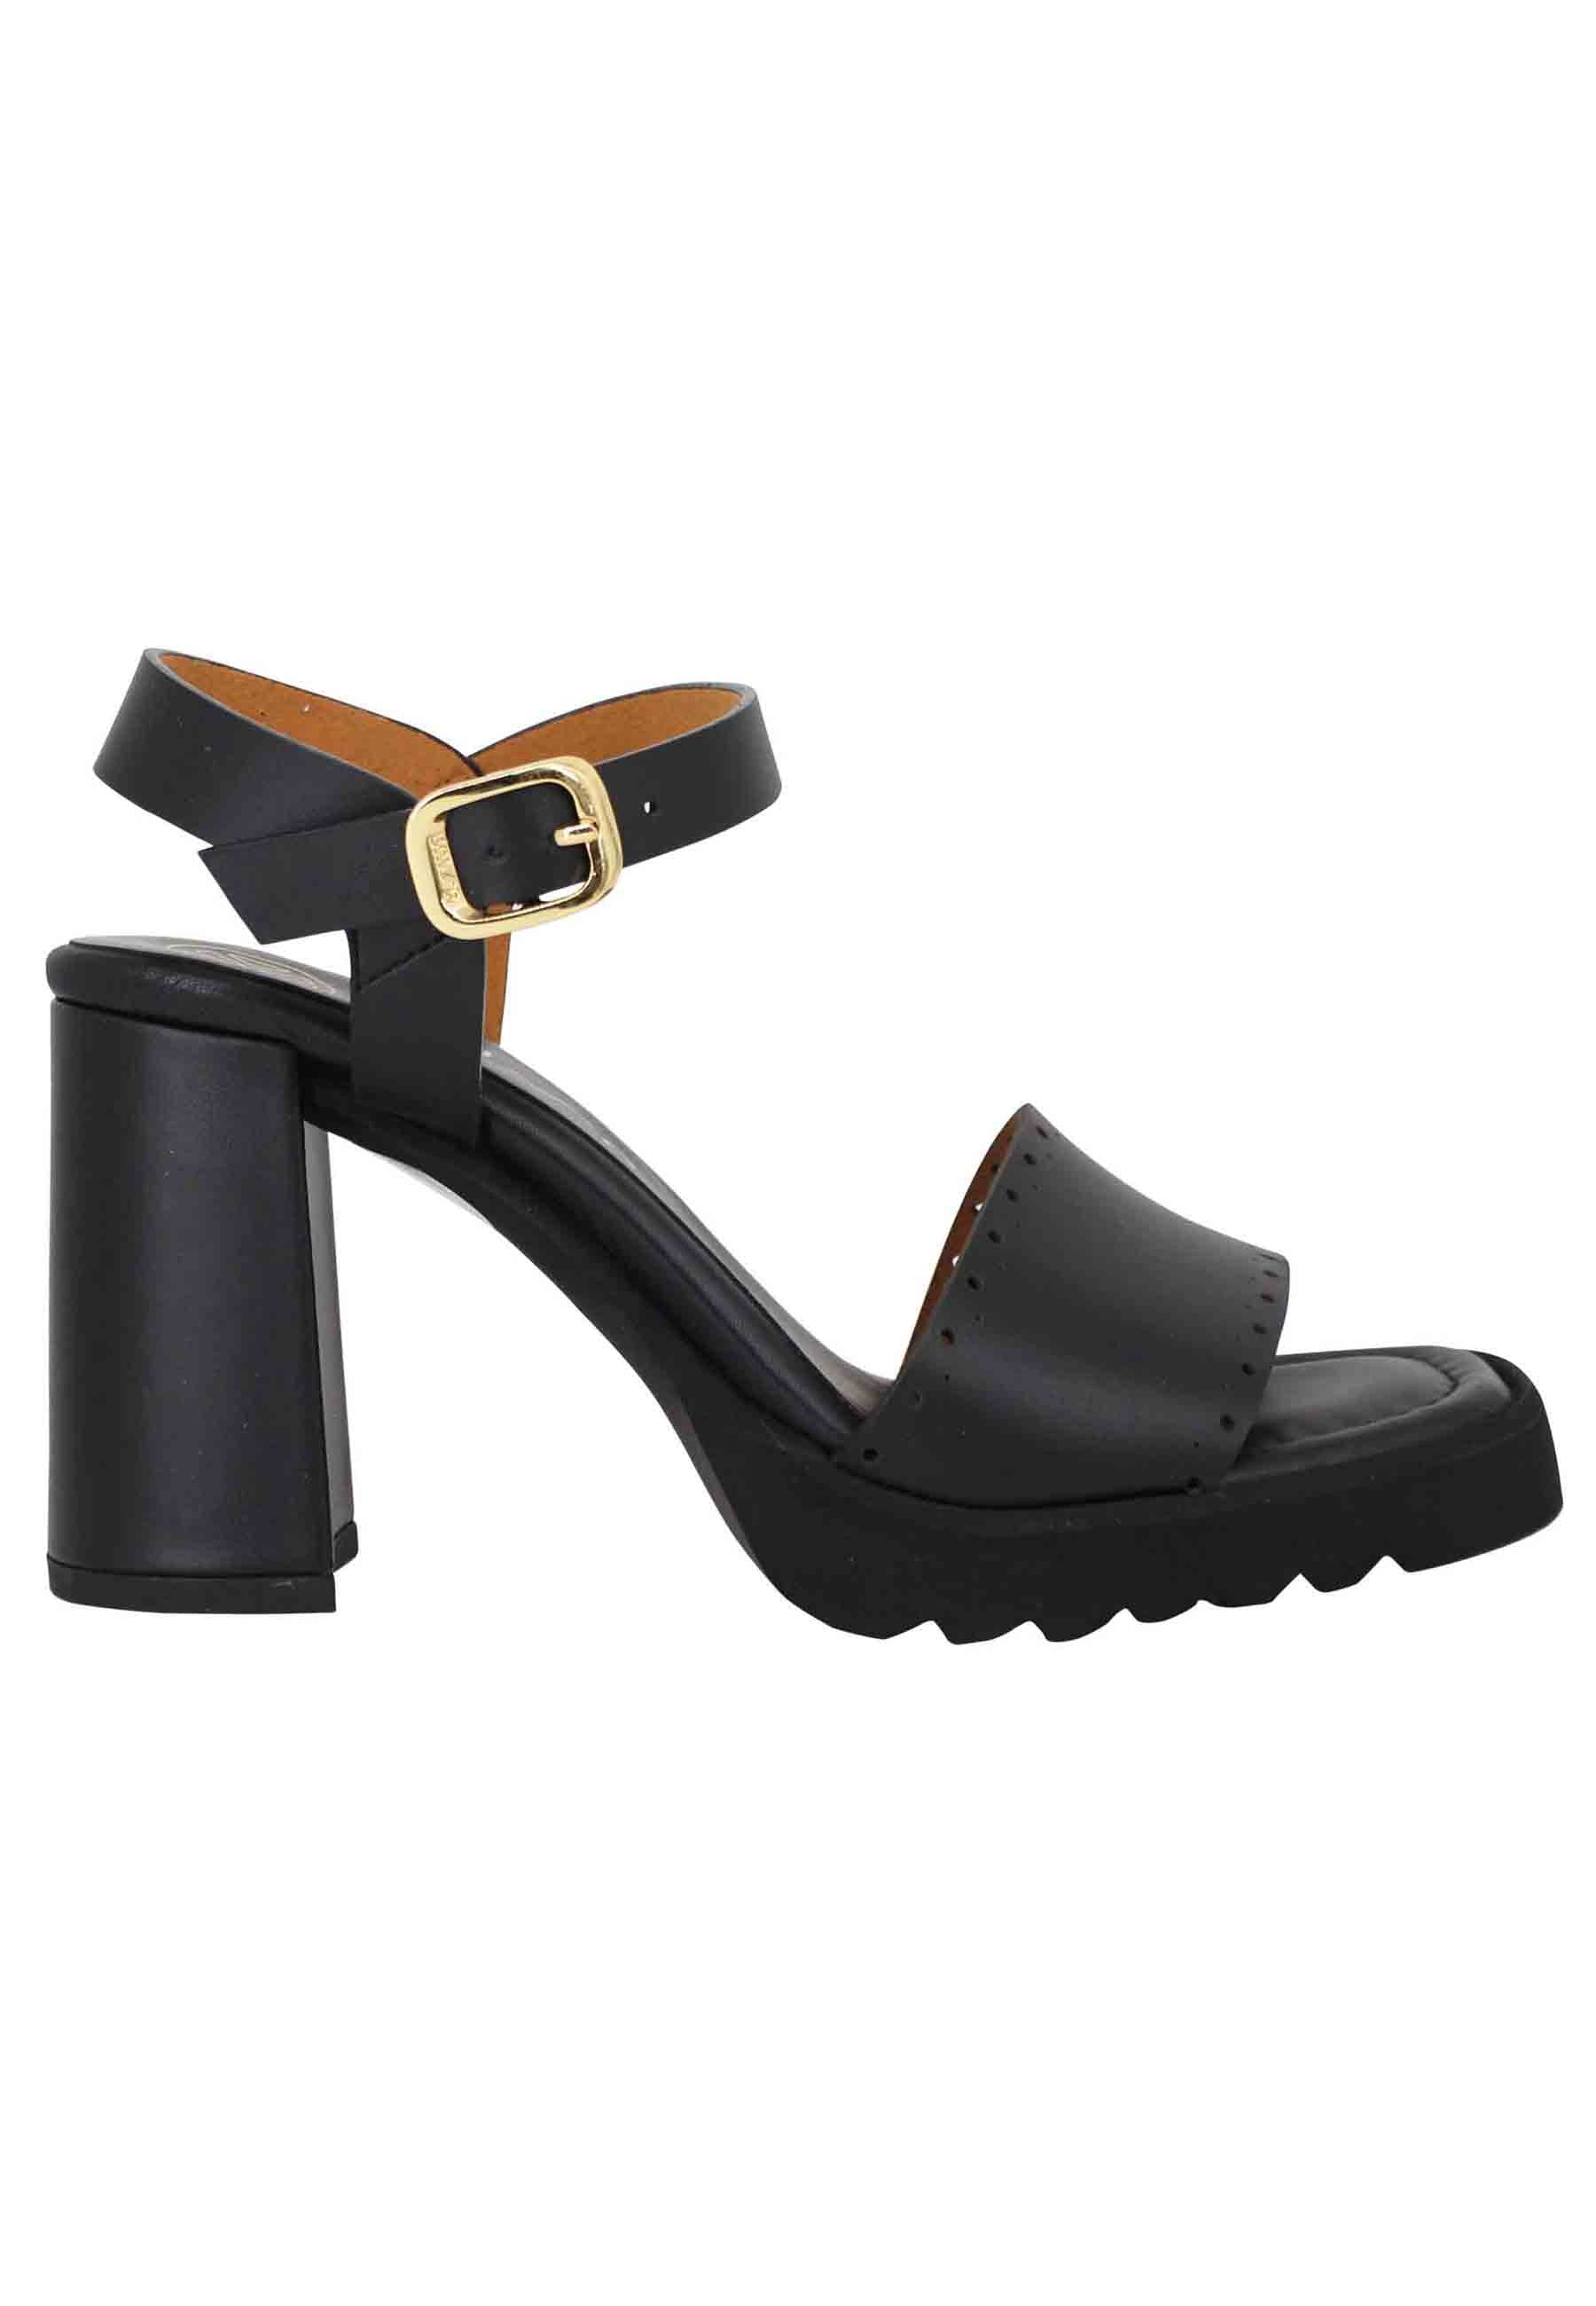 Women's black leather sandals with high heel and rubber platform